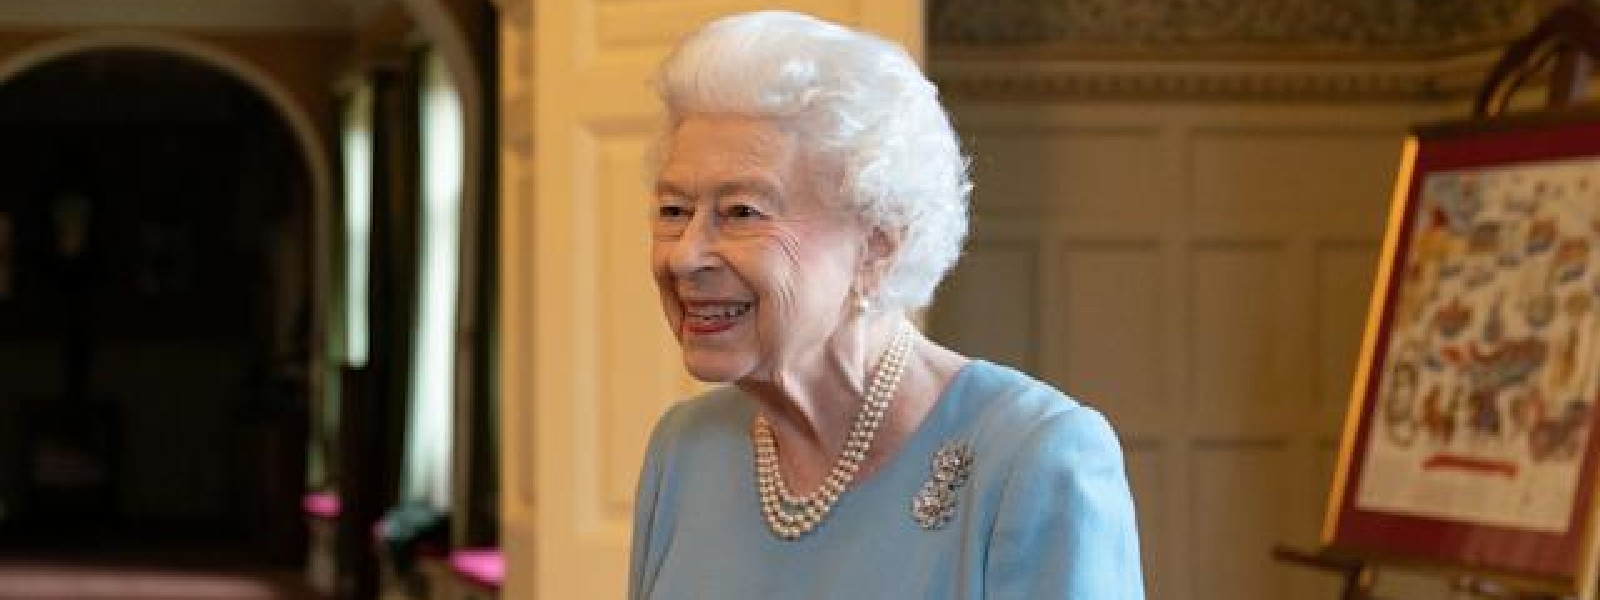 President Wickremesinghe wishes the Queen a speedy recovery